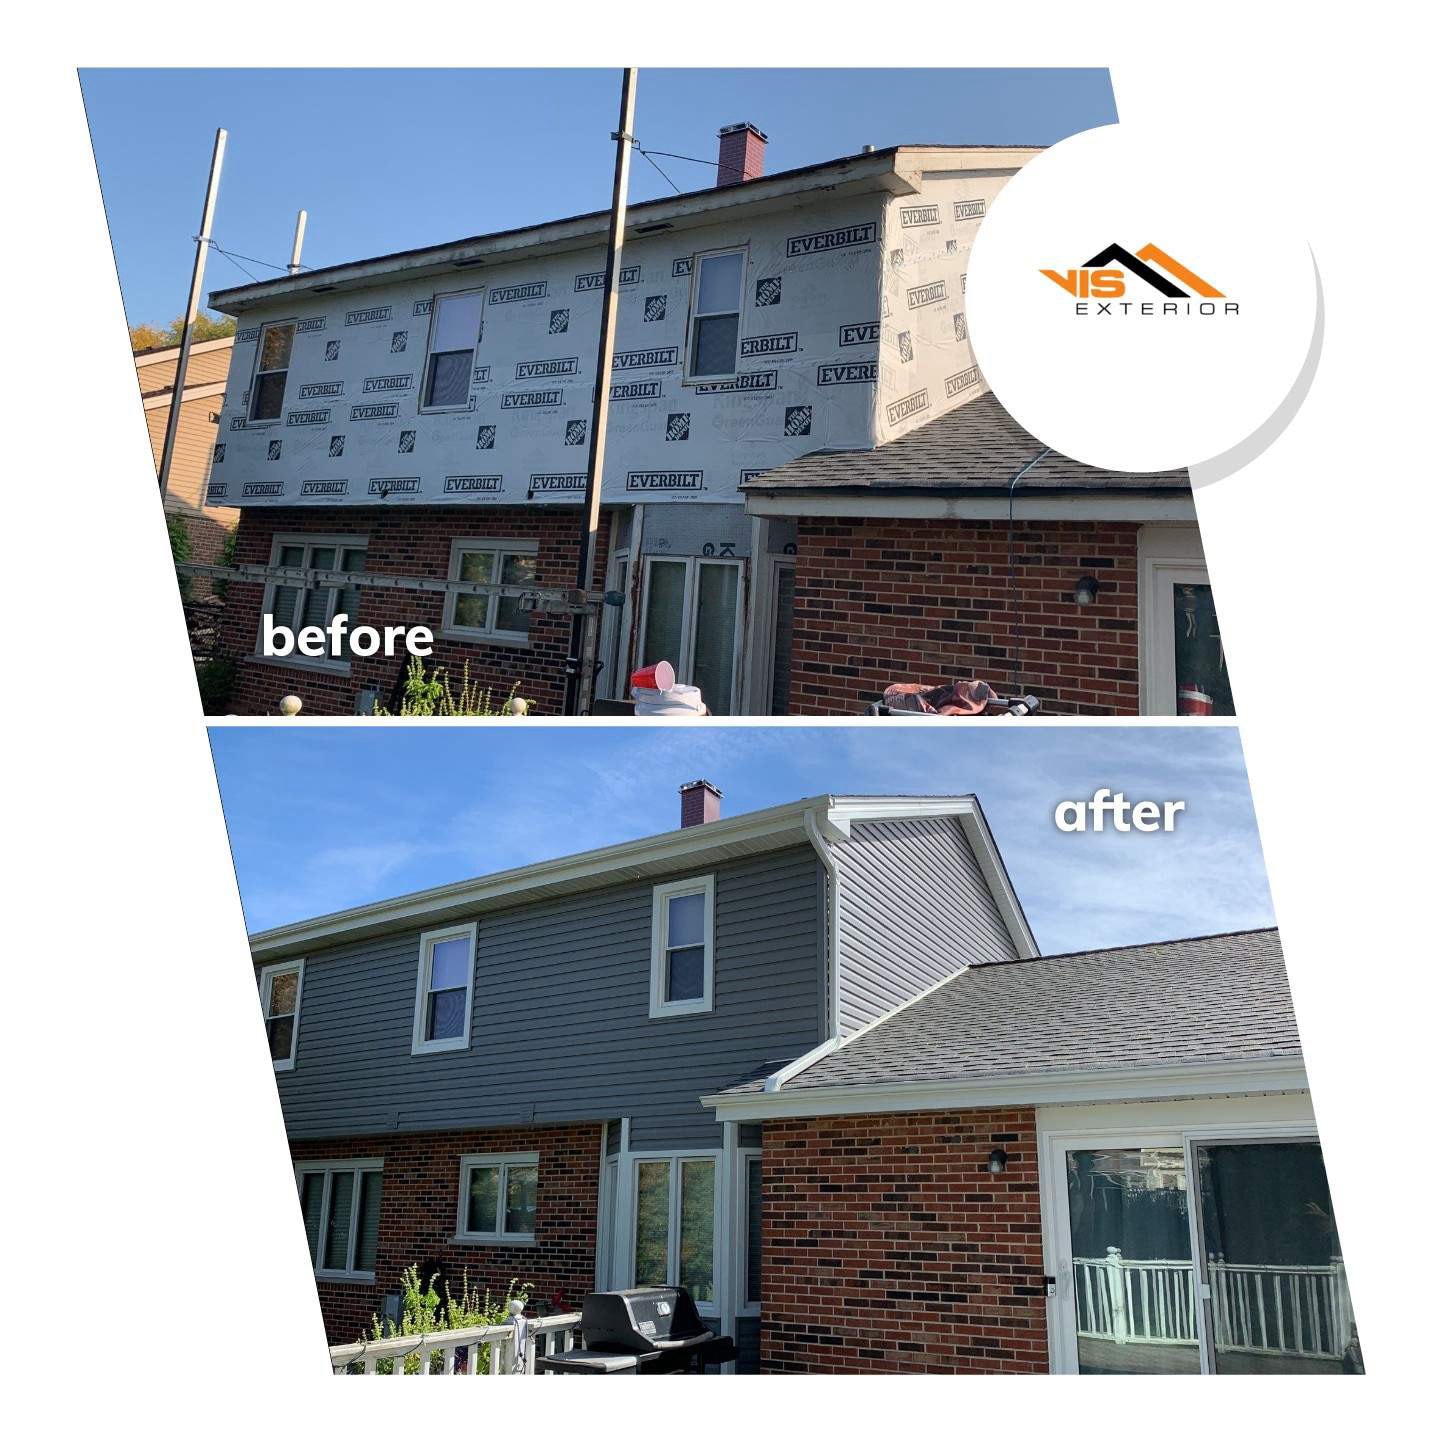 Royal Estate siding installation and  shingle roof replacement in Woodridge before after project photo